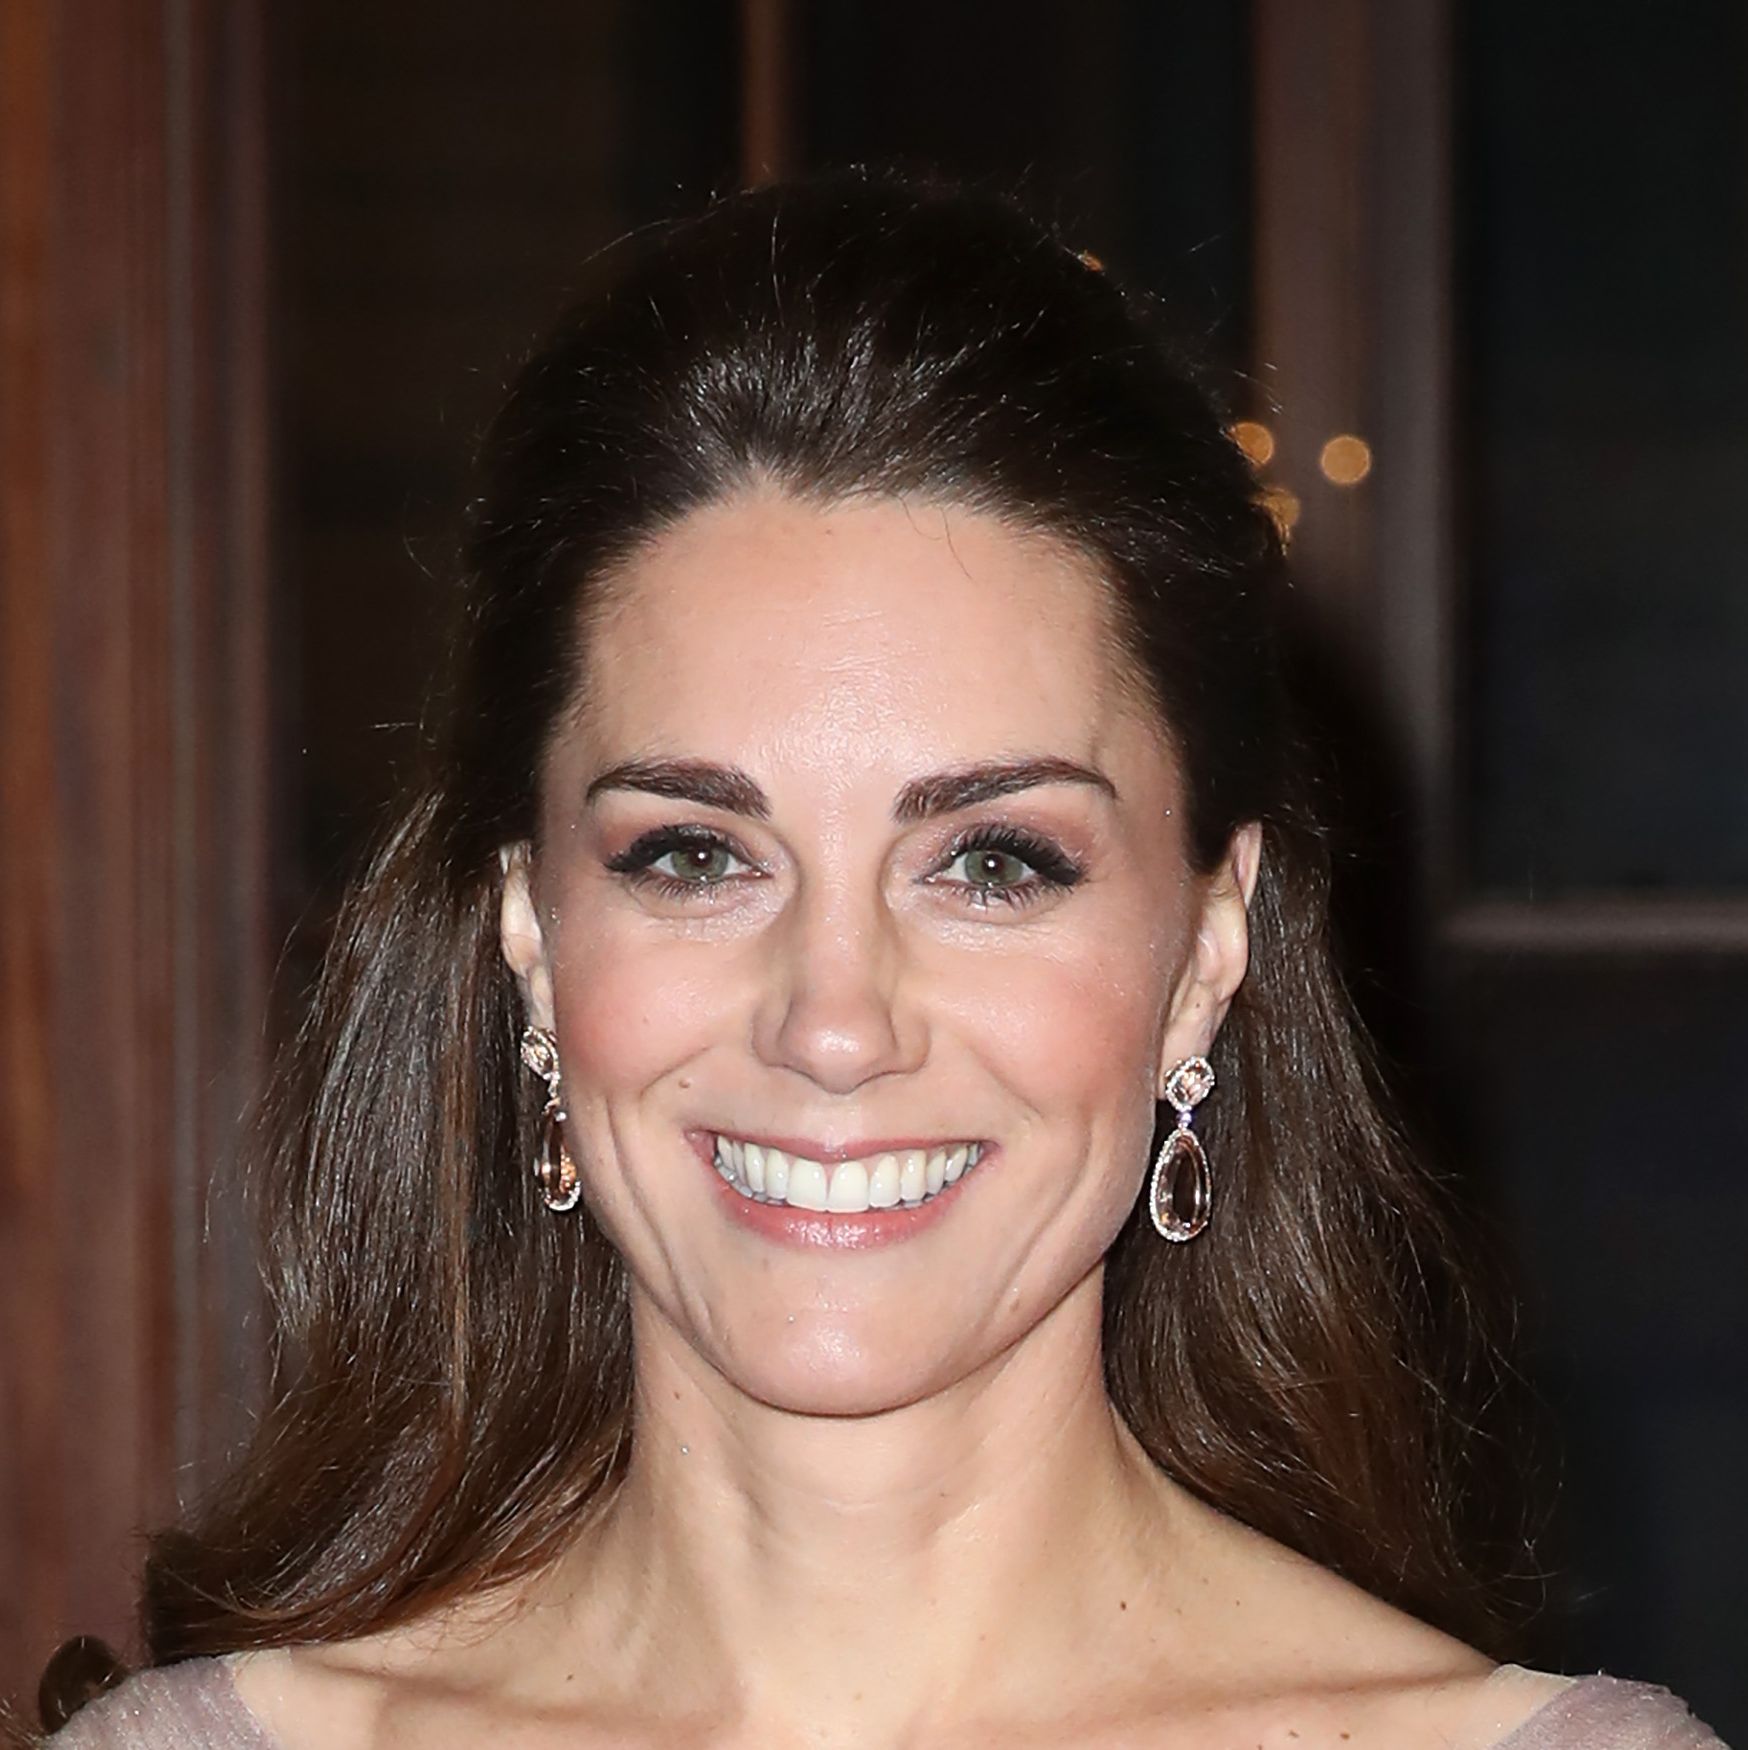 Kate Middleton Wears Pink Gucci Dress to Royal Gala at the